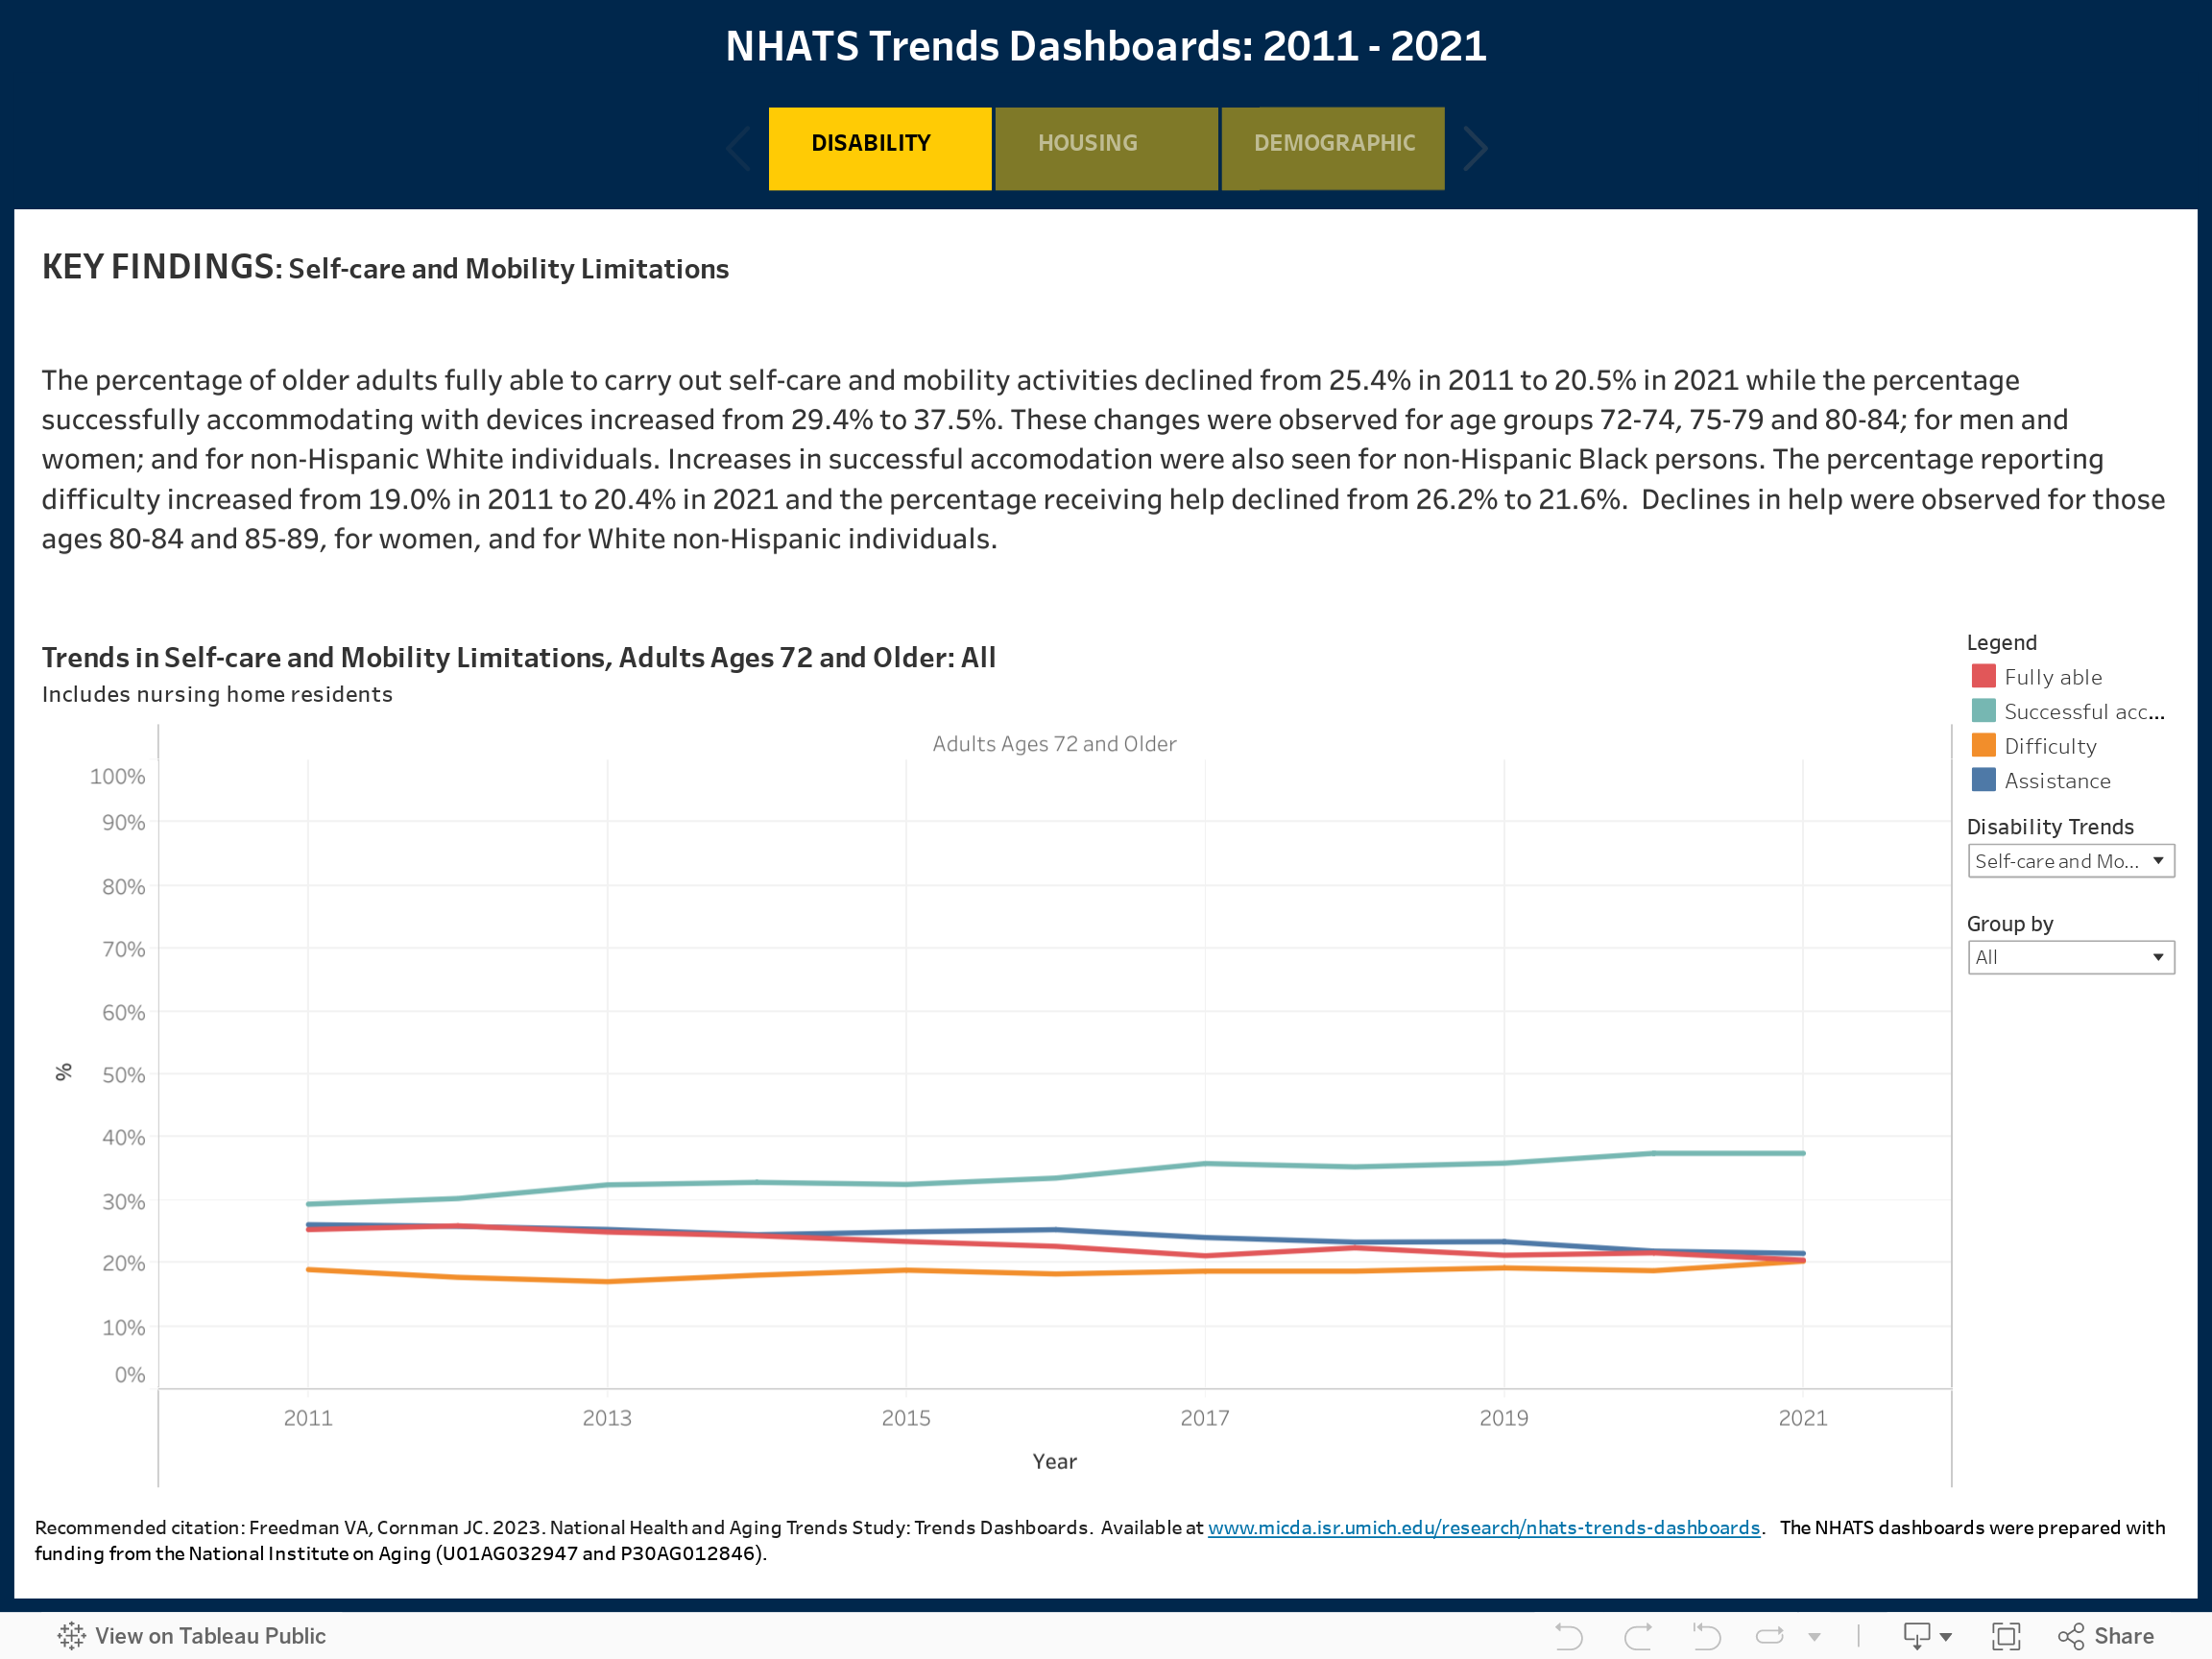 NHATS Trends Dashboards: 2011 - 2021 